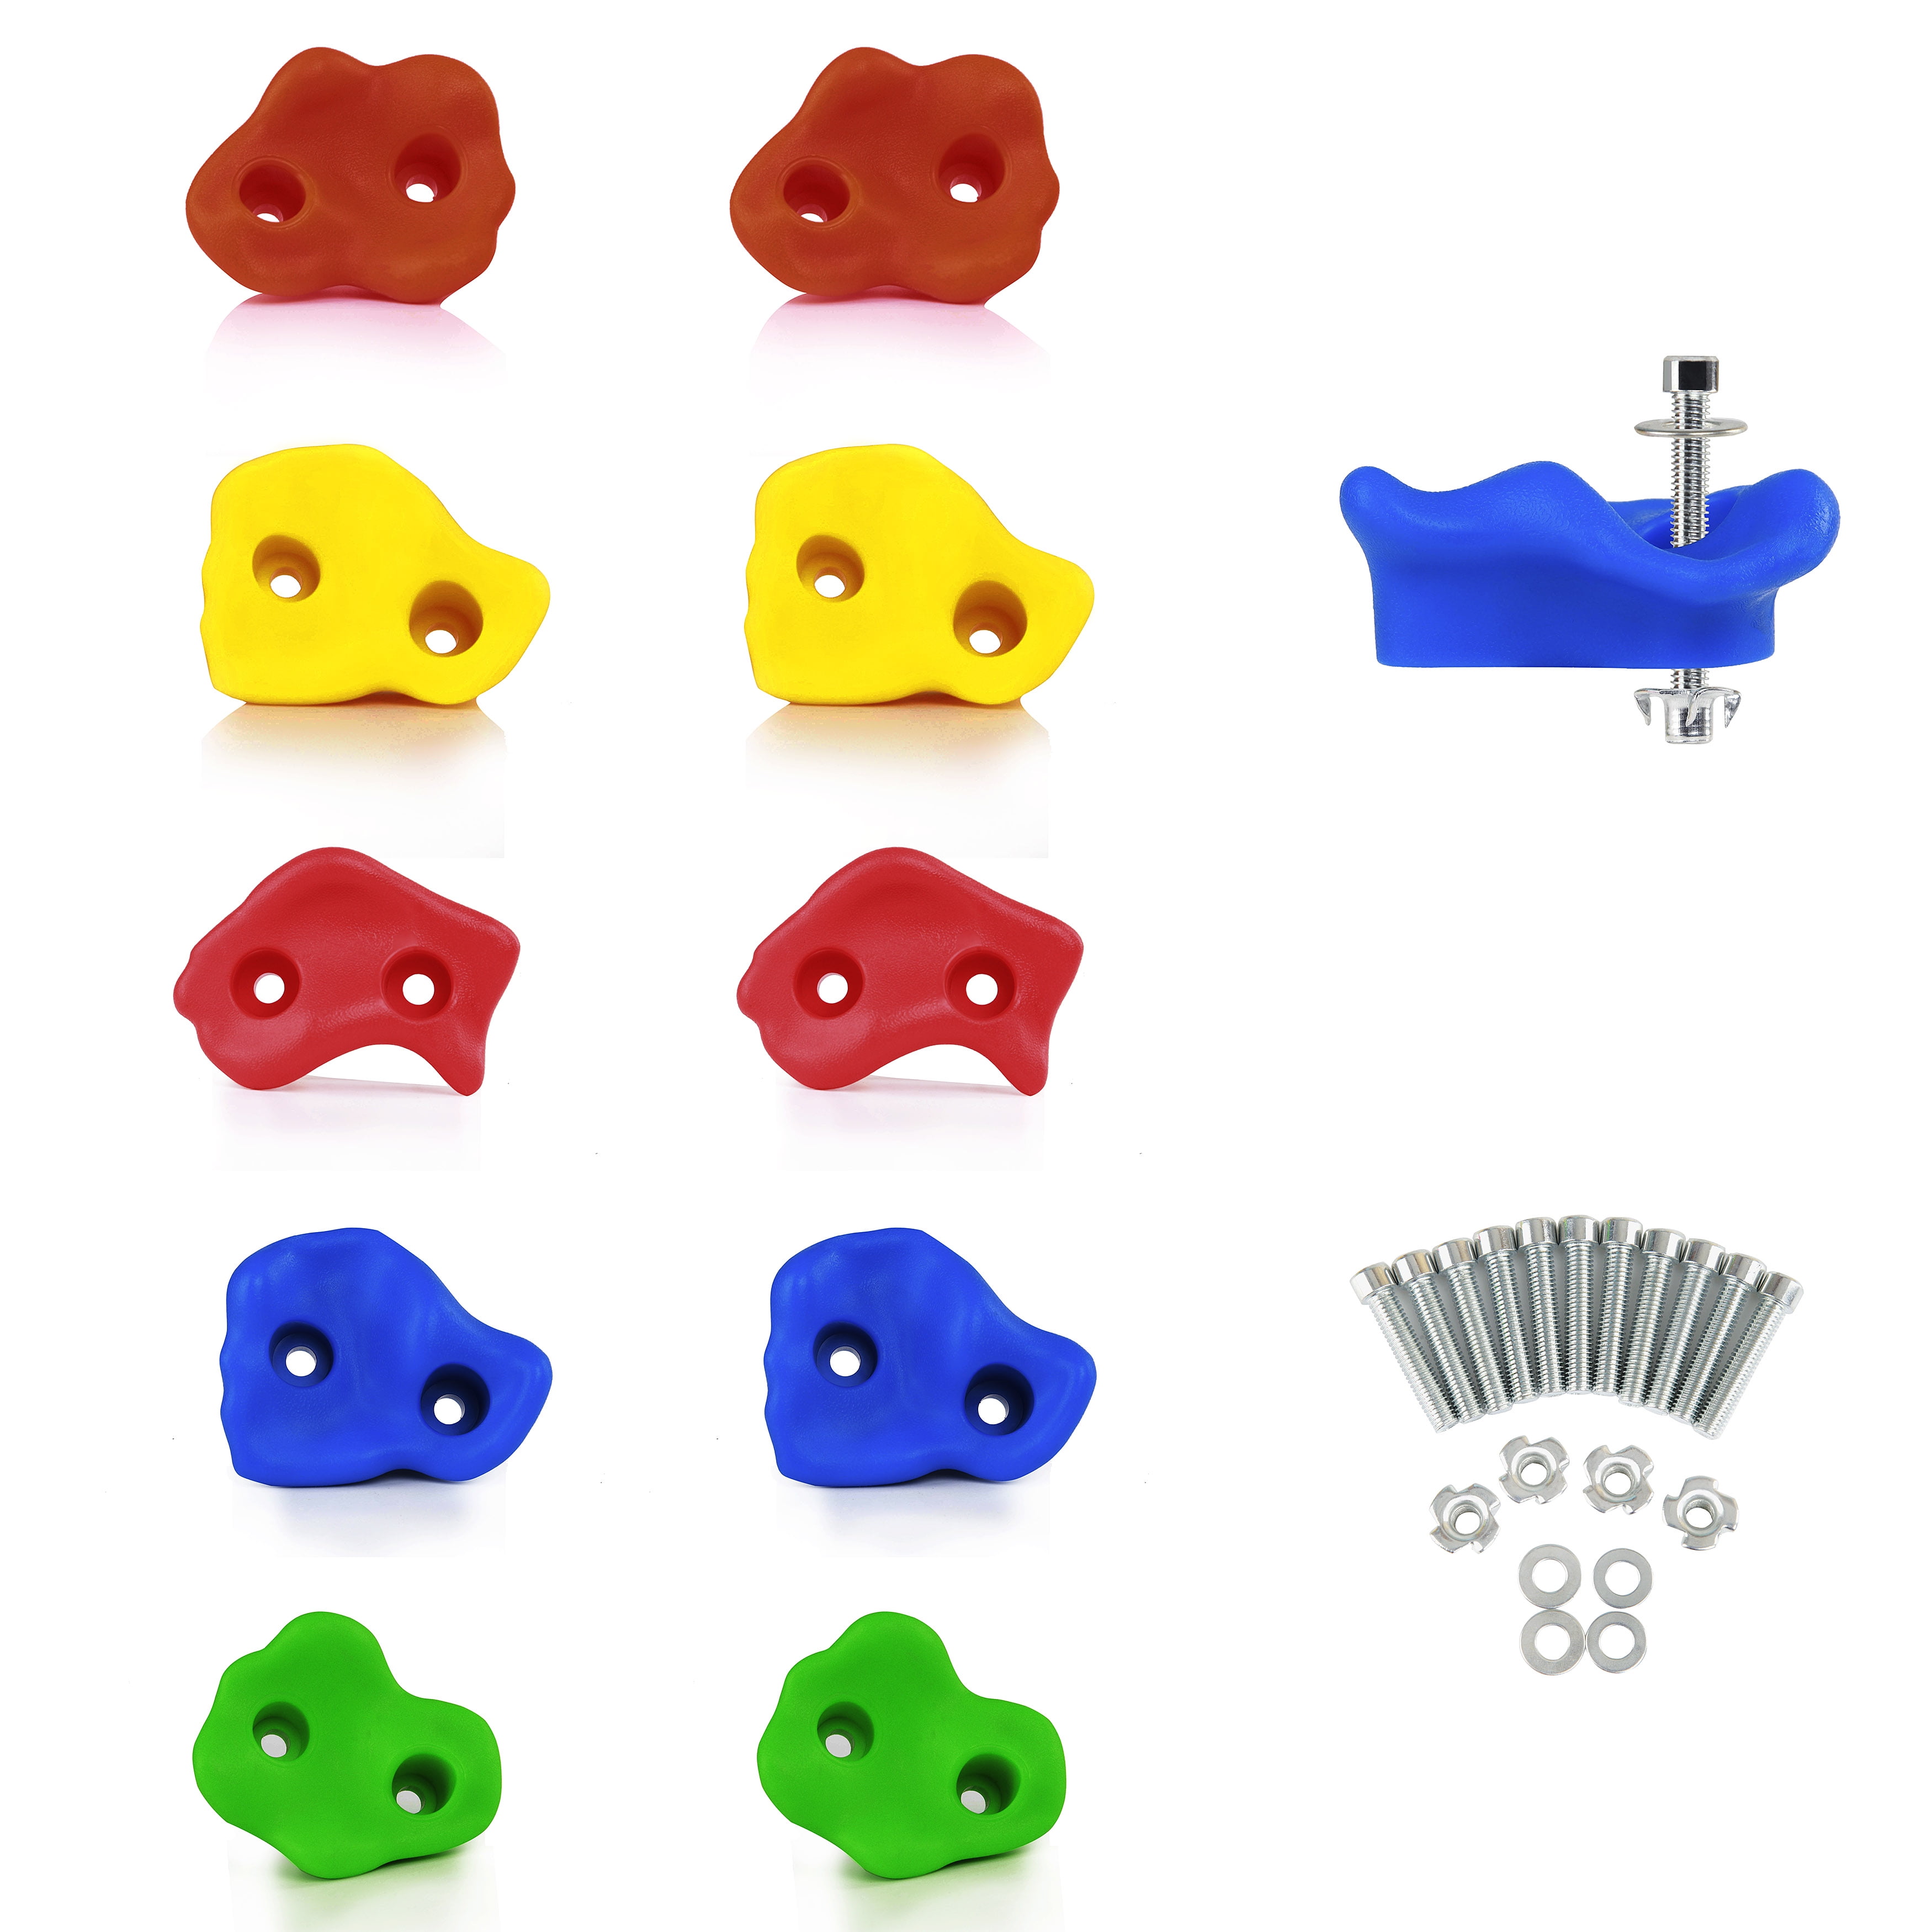 10 Textured Resin Bolt on Climbing Frame Rock Wall Grab Holds Grip 80mm Stones for sale online 